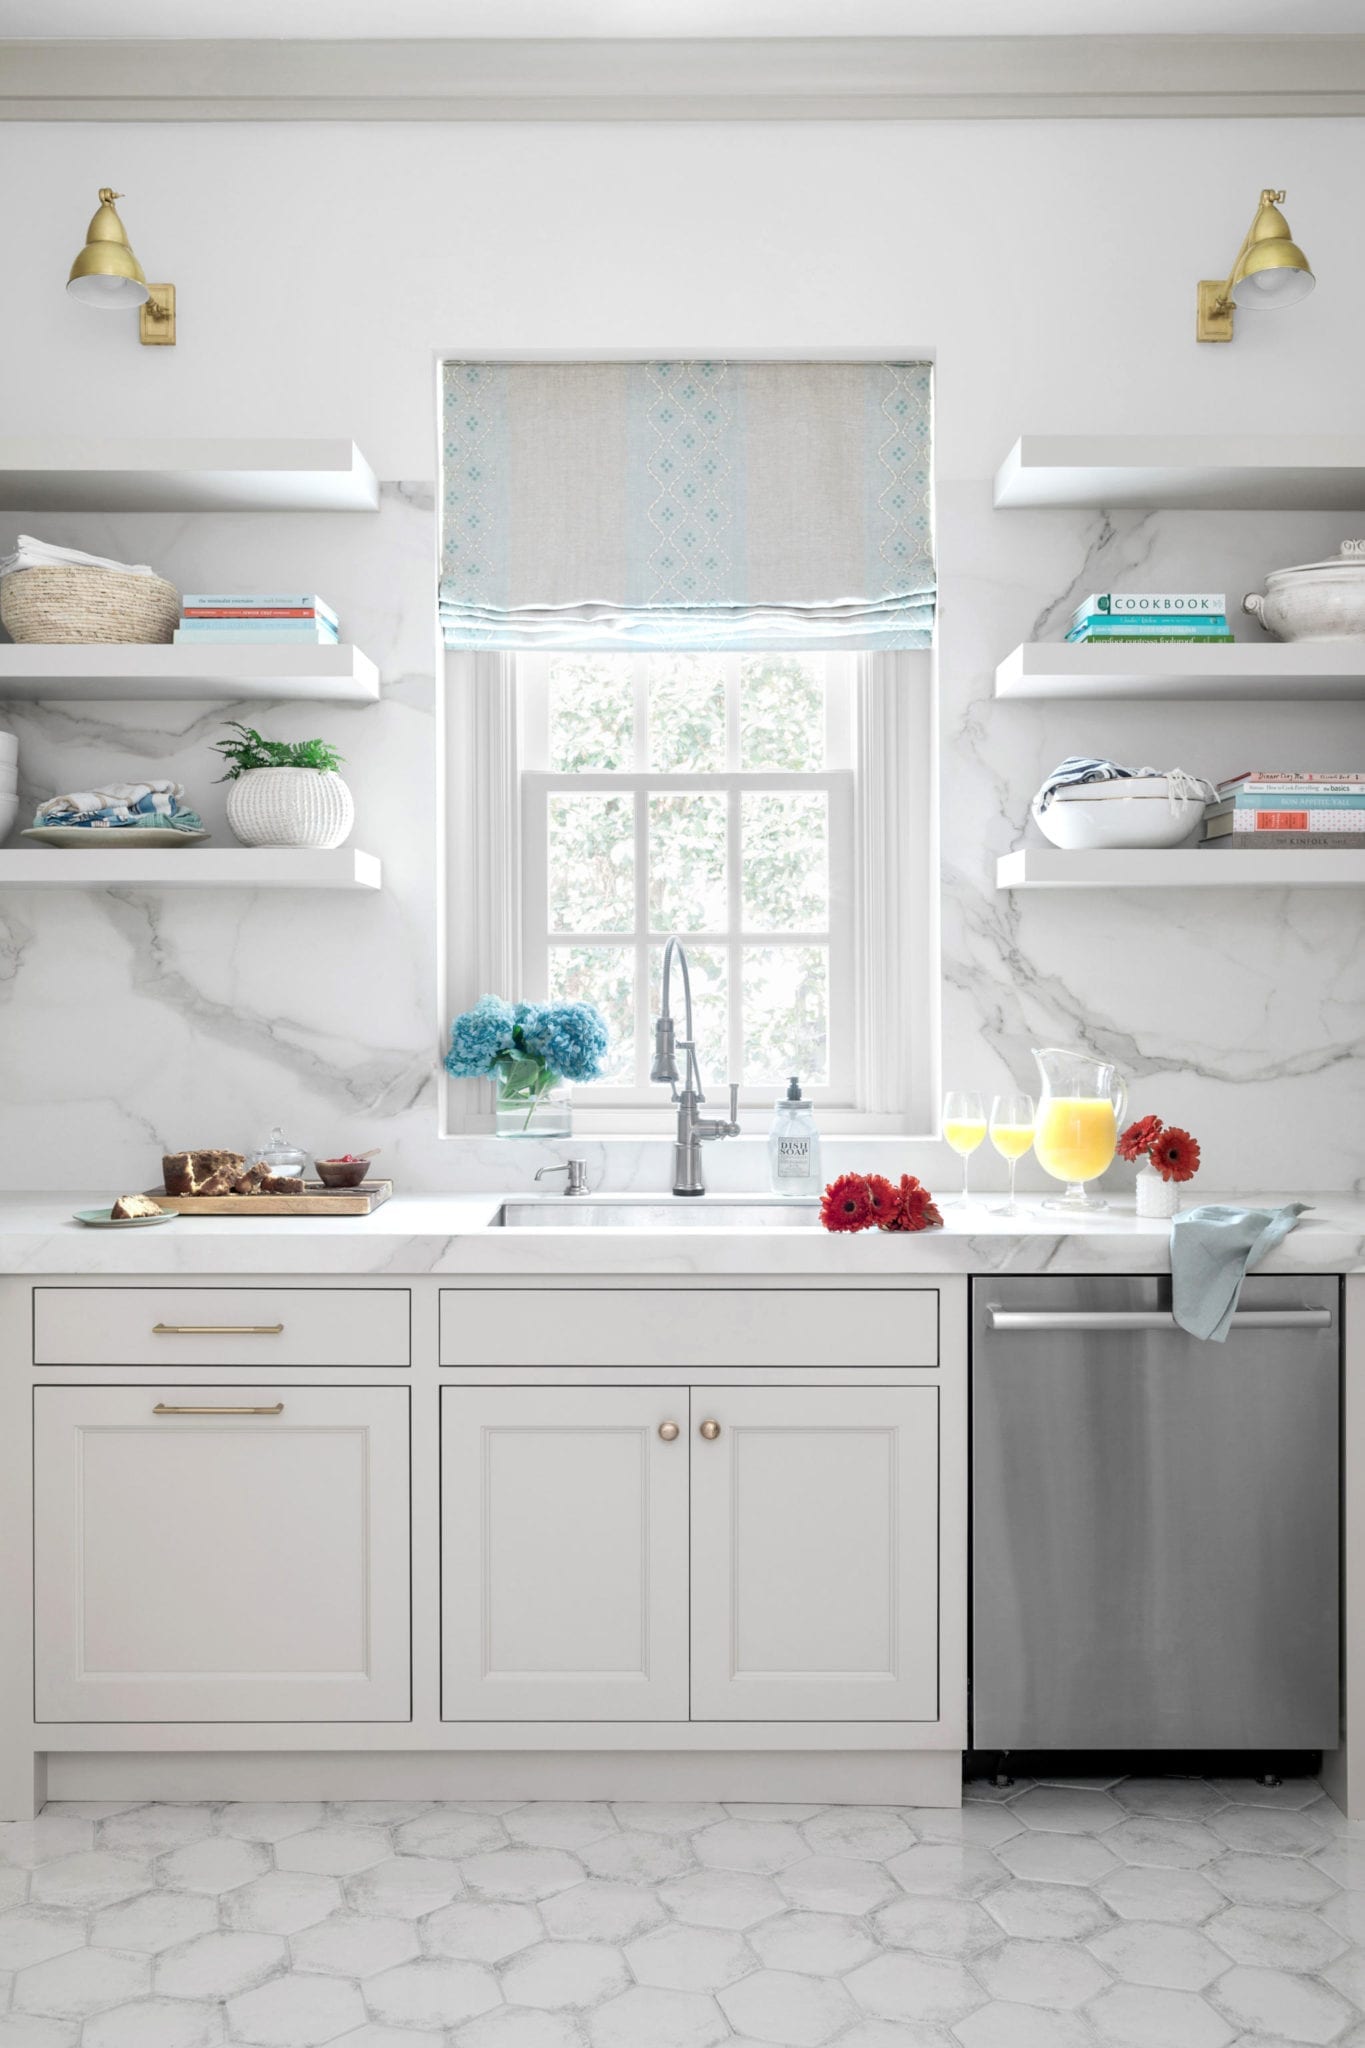 Open Shelves with white tile and blue gray accents in a scullery kitchen.